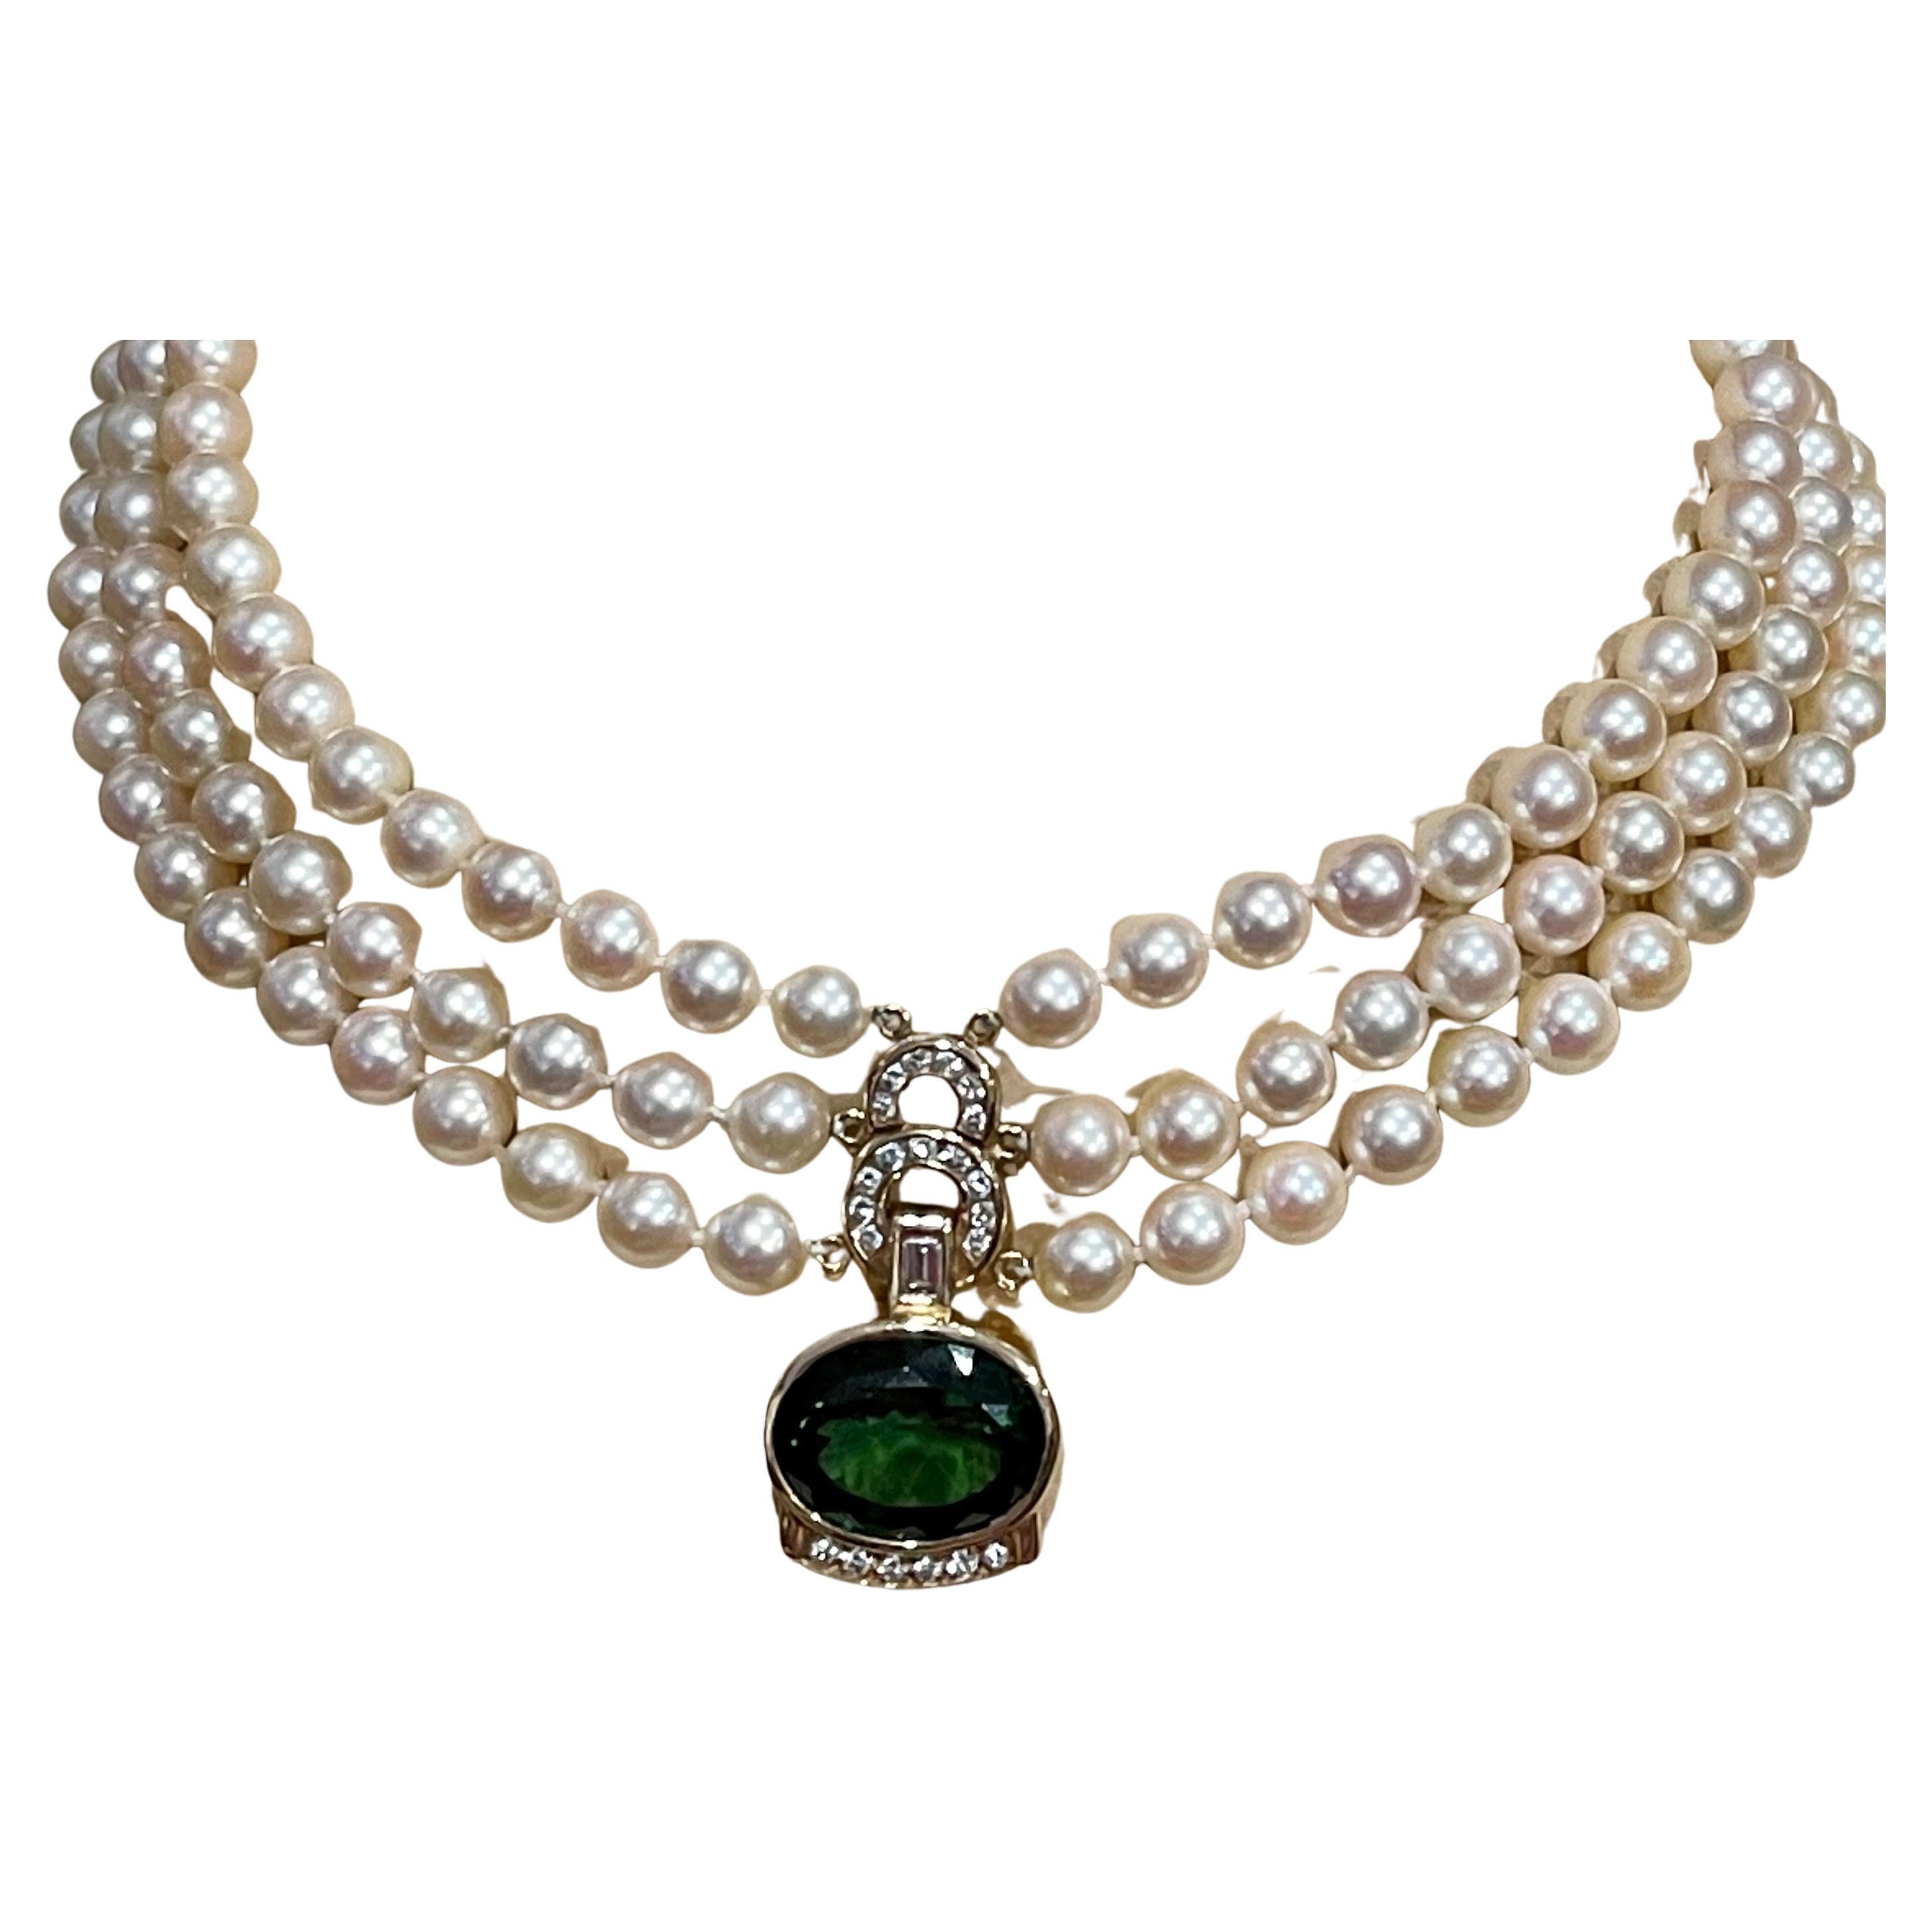 
Huge 18 Carat Green Tourmaline & 2.5 Carat Diamond Pendant / Necklace 14 Karat Yellow Gold and three layers of natural pearls, Estate
This spectacular Pendant Necklace  consisting of a single Oval Shape Green Tourmaline 18 Carat.  The  Green